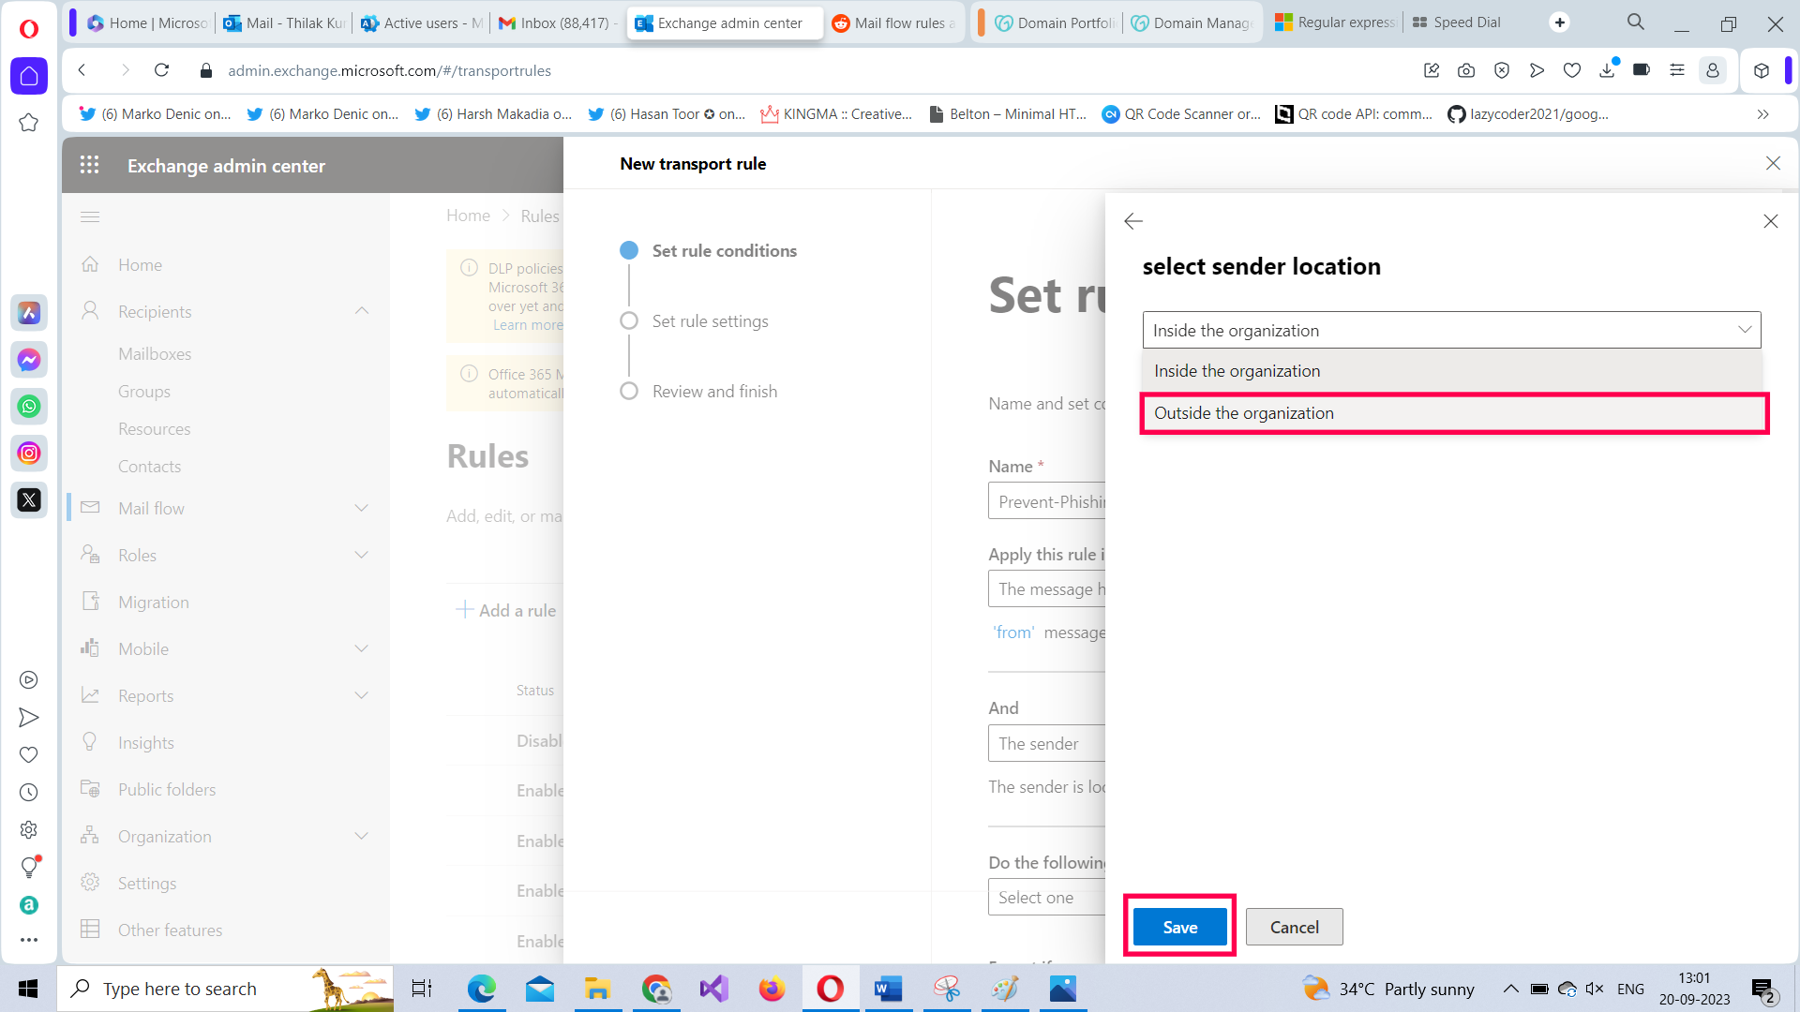 This screenshot shows how you can set the sender value as 'outside the organization' as one of the conditions for the mail flow rule being configured. 